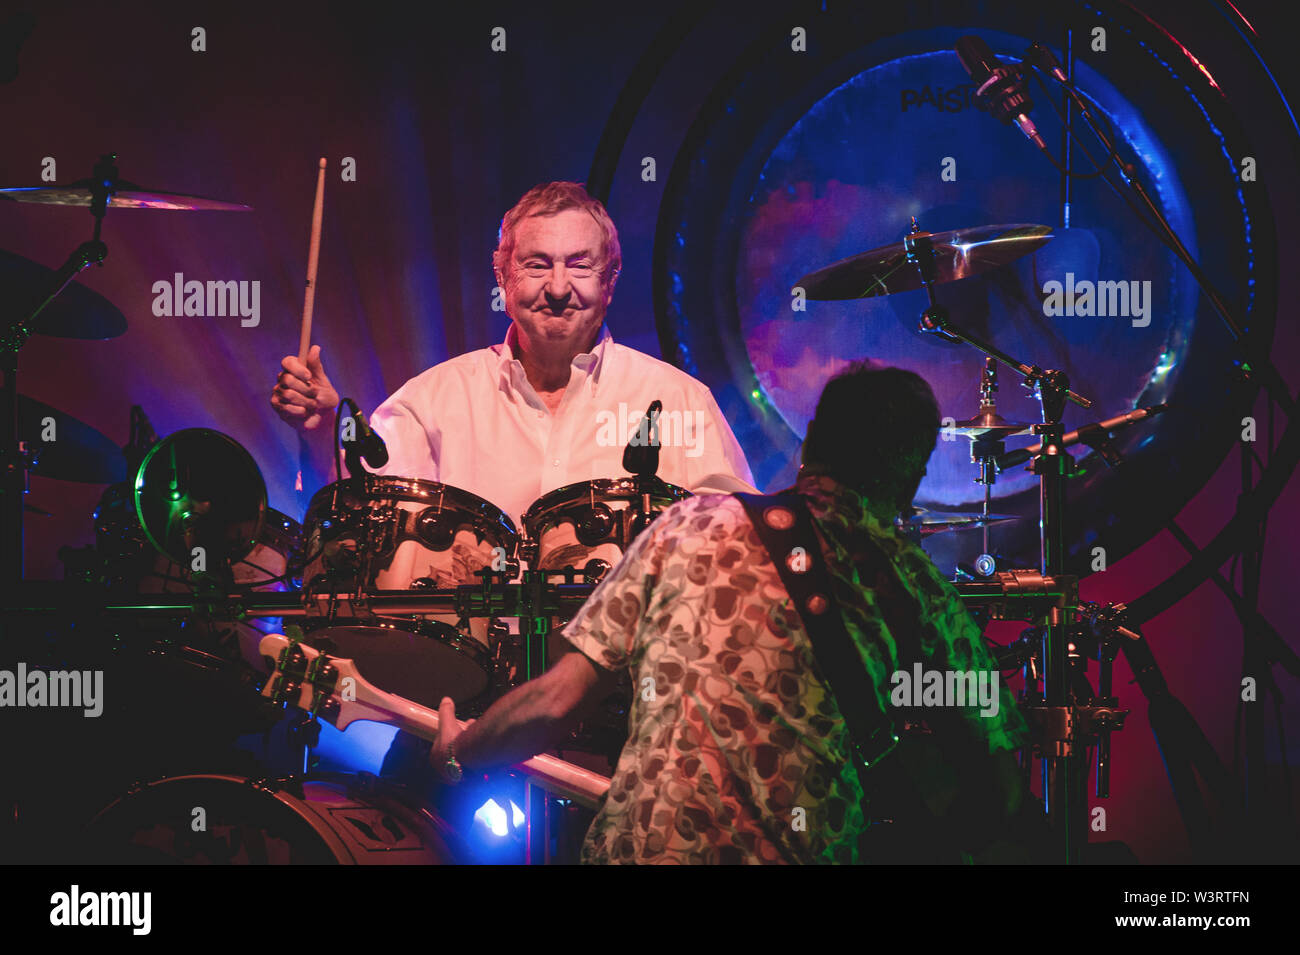 Nick Mason's Saucerful Of Secrets, the band led by Pink Floyd drummer, on tour this summer in Italy.Nick Mason's Saucerful Of Secrets are formed by Nick Mason, Gary Kemp, Guy Pratt, Lee Harris and Dom Beken. The concerts celebrate the first Pink Floyd musical works and include songs taken from the albums 'The Piper At The Gates of Dawn' and 'A Saucerful Of Secrets'. (Photo by Fabrizio Di Bitonto / Pacific Press) Stock Photo